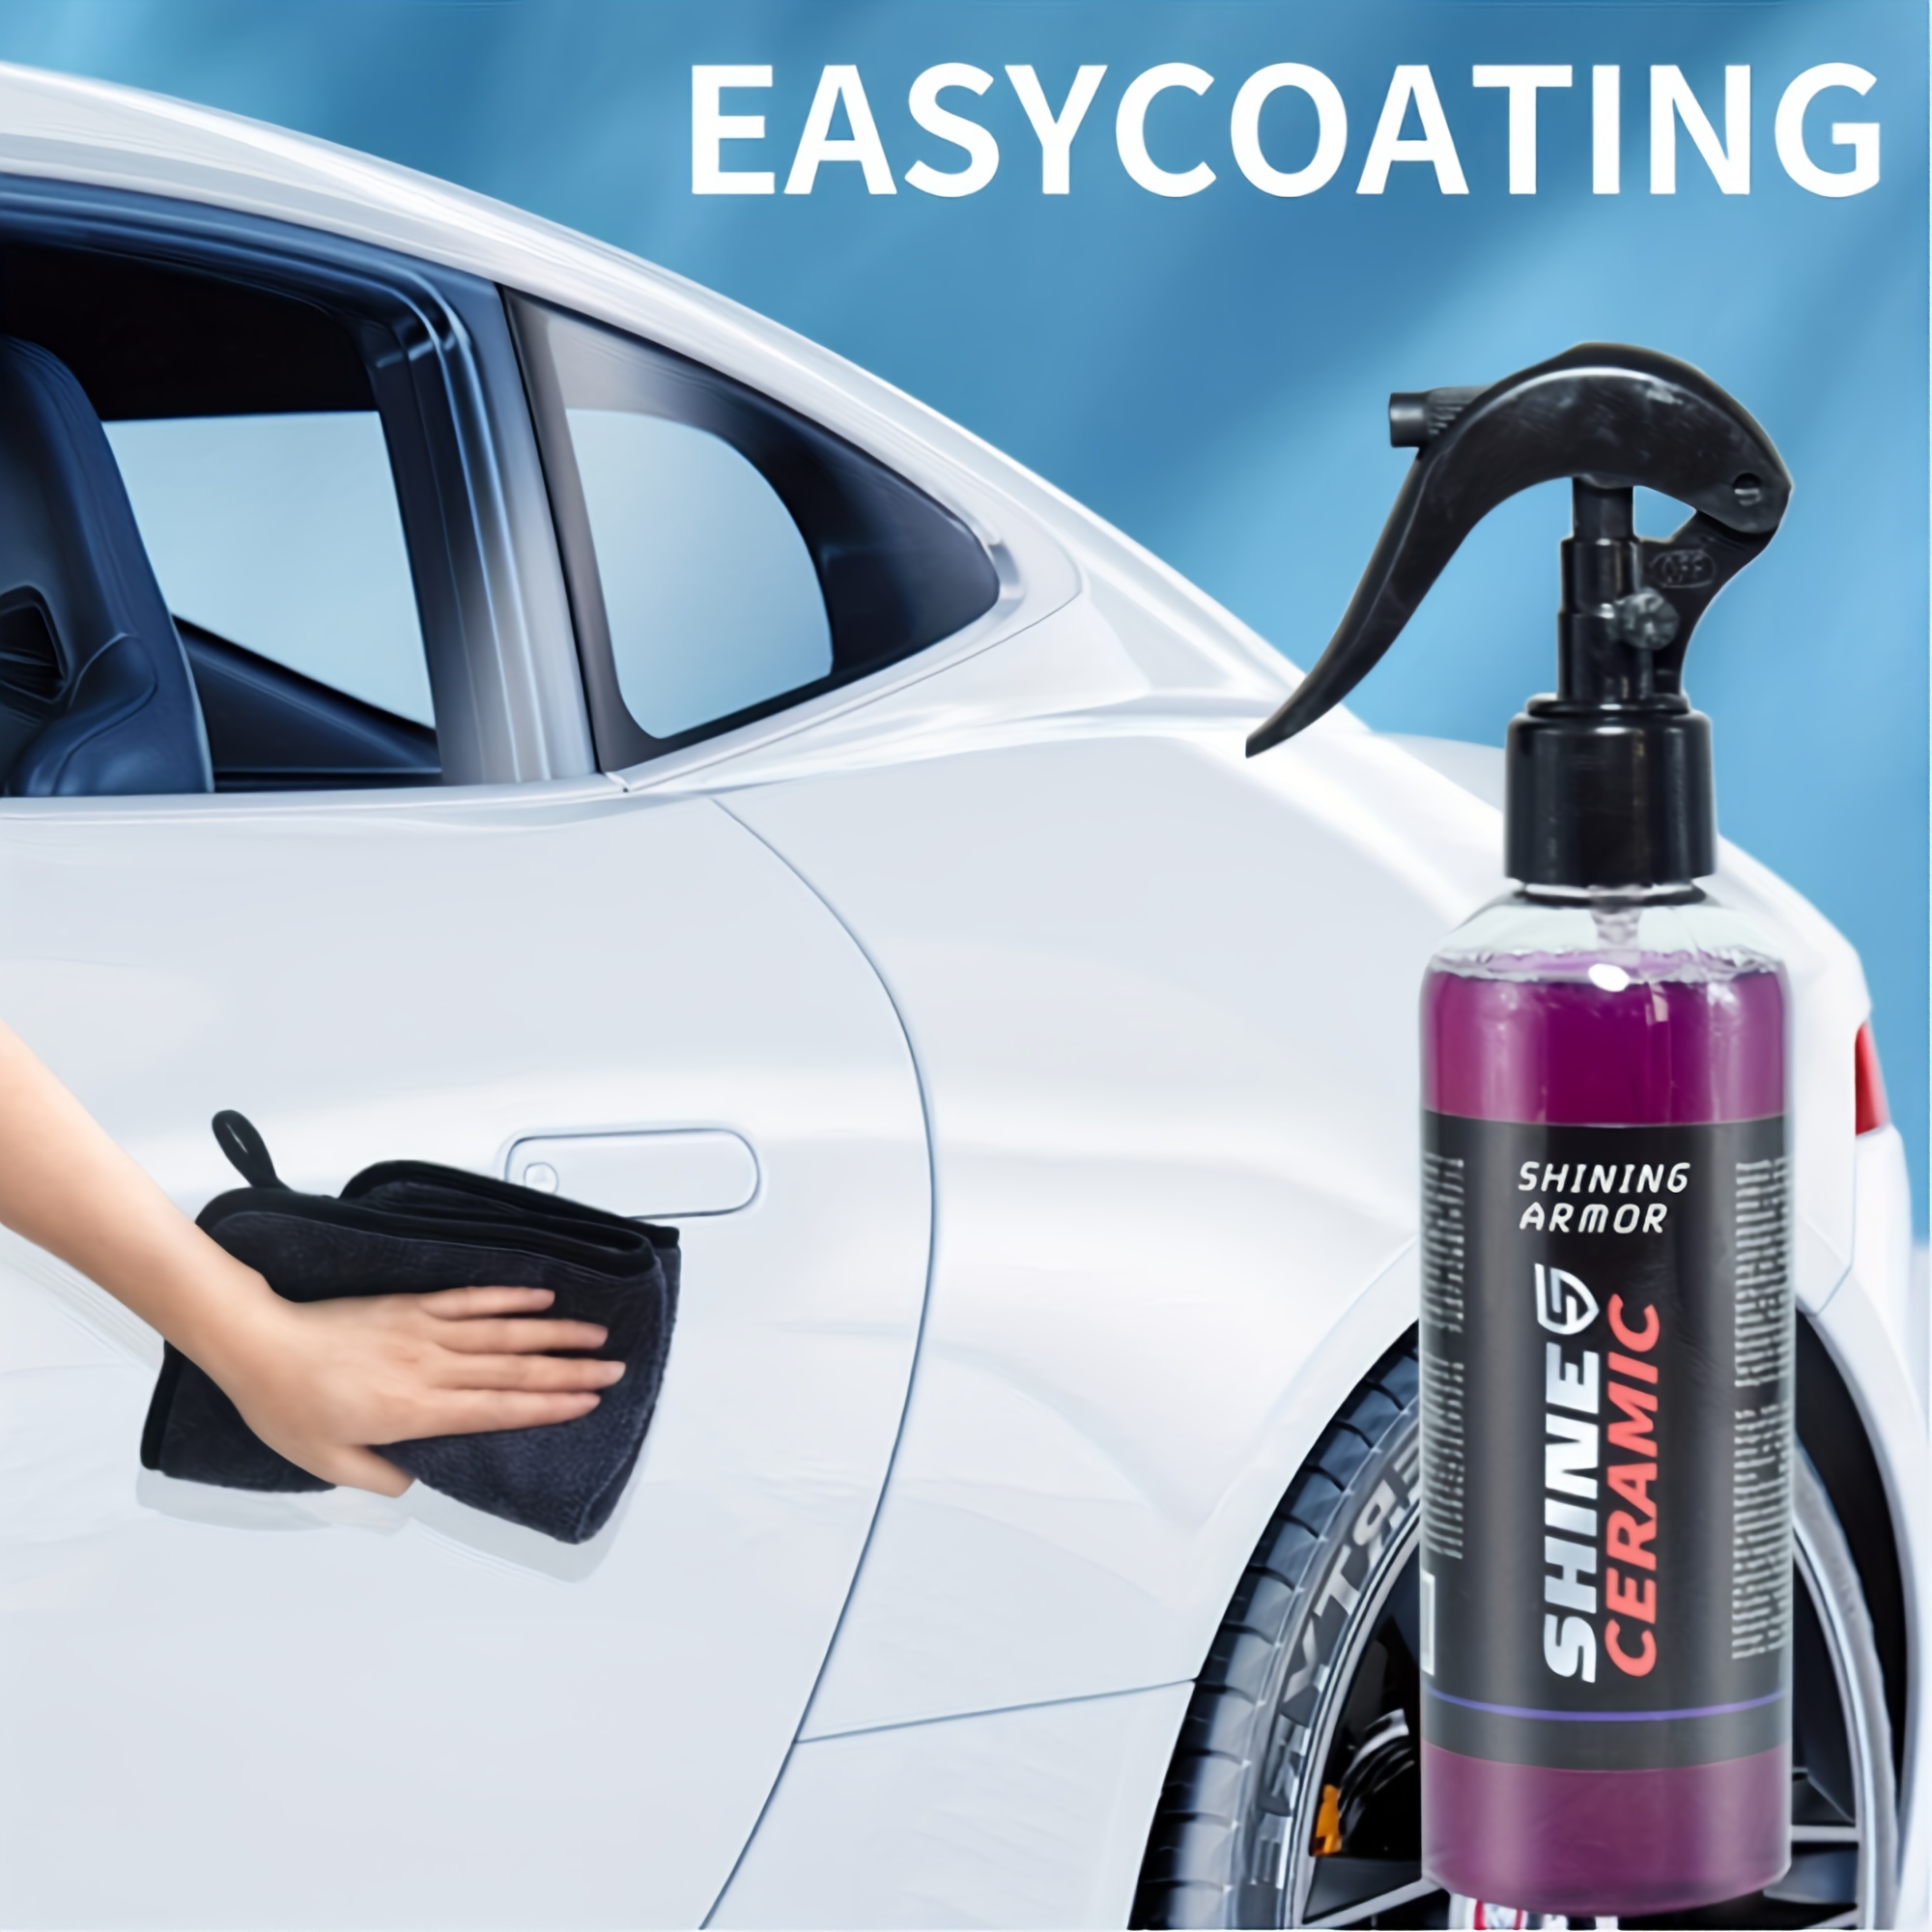 Ceramic Car Coating Nano For Paint Care 3 In 1 Crystal Wax Spray  Hydrophobic Polymer Detail